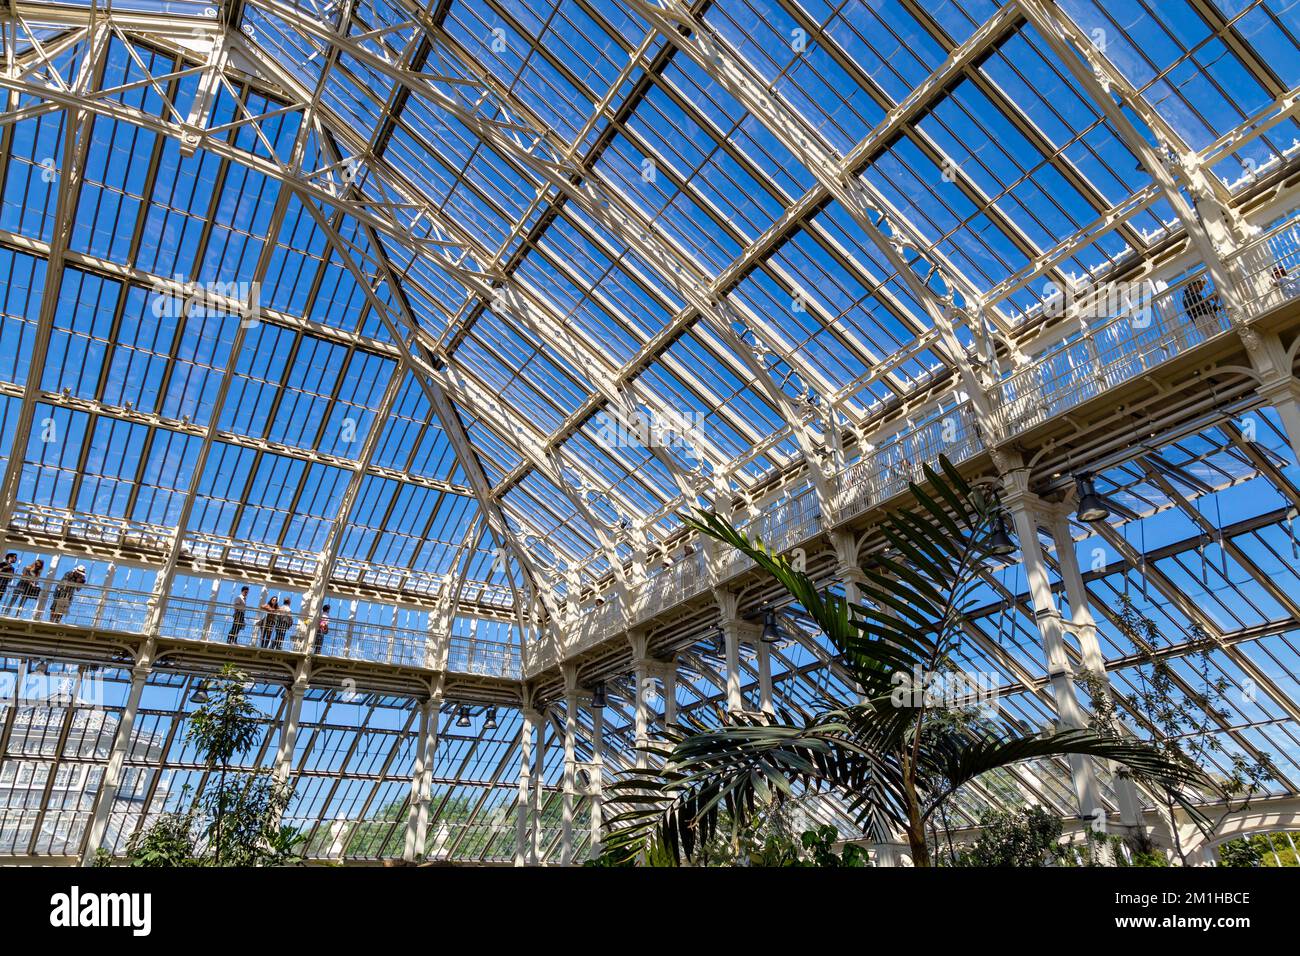 Iron and glass roof and mezzanine walkways of newly refurbished and reopened Temperate House in Kew Gardens, London, UK Stock Photo